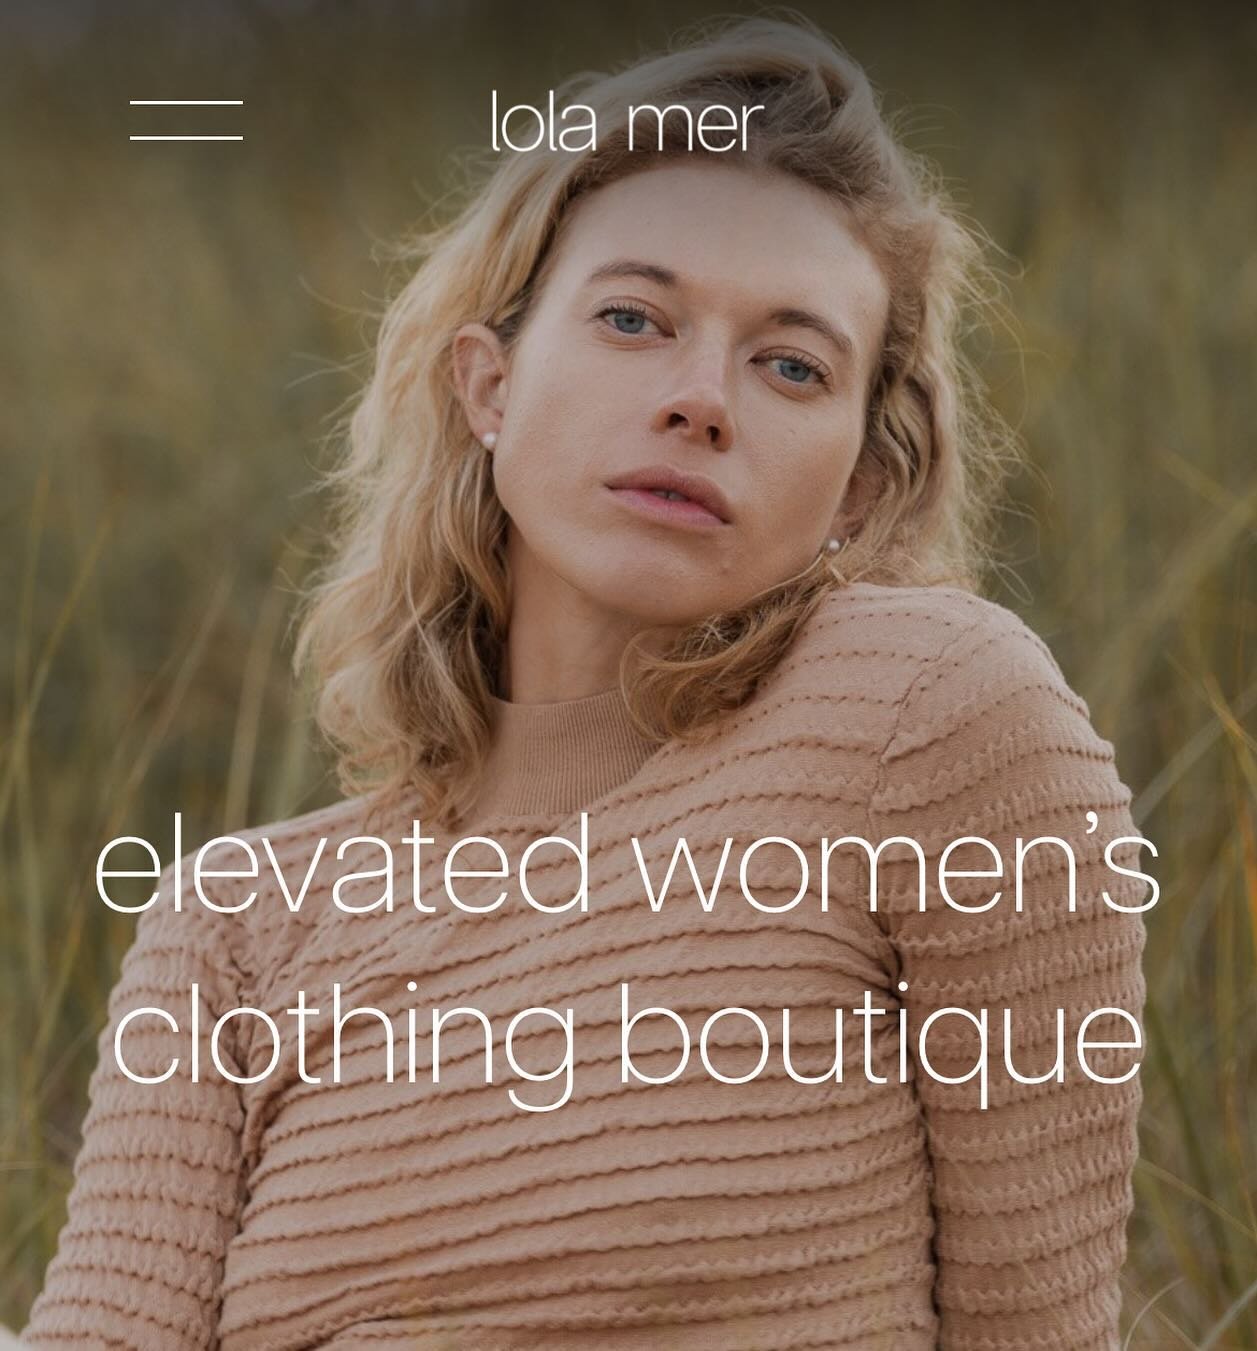 We are so excited to share our new website! We are over the moon with how this came out.  Thank you @vovimedia and of course, our model @sweetwilled.  Check us out online at lolamer.com or in store. 

Spring hours are Friday, Saturday and Sunday 12-5